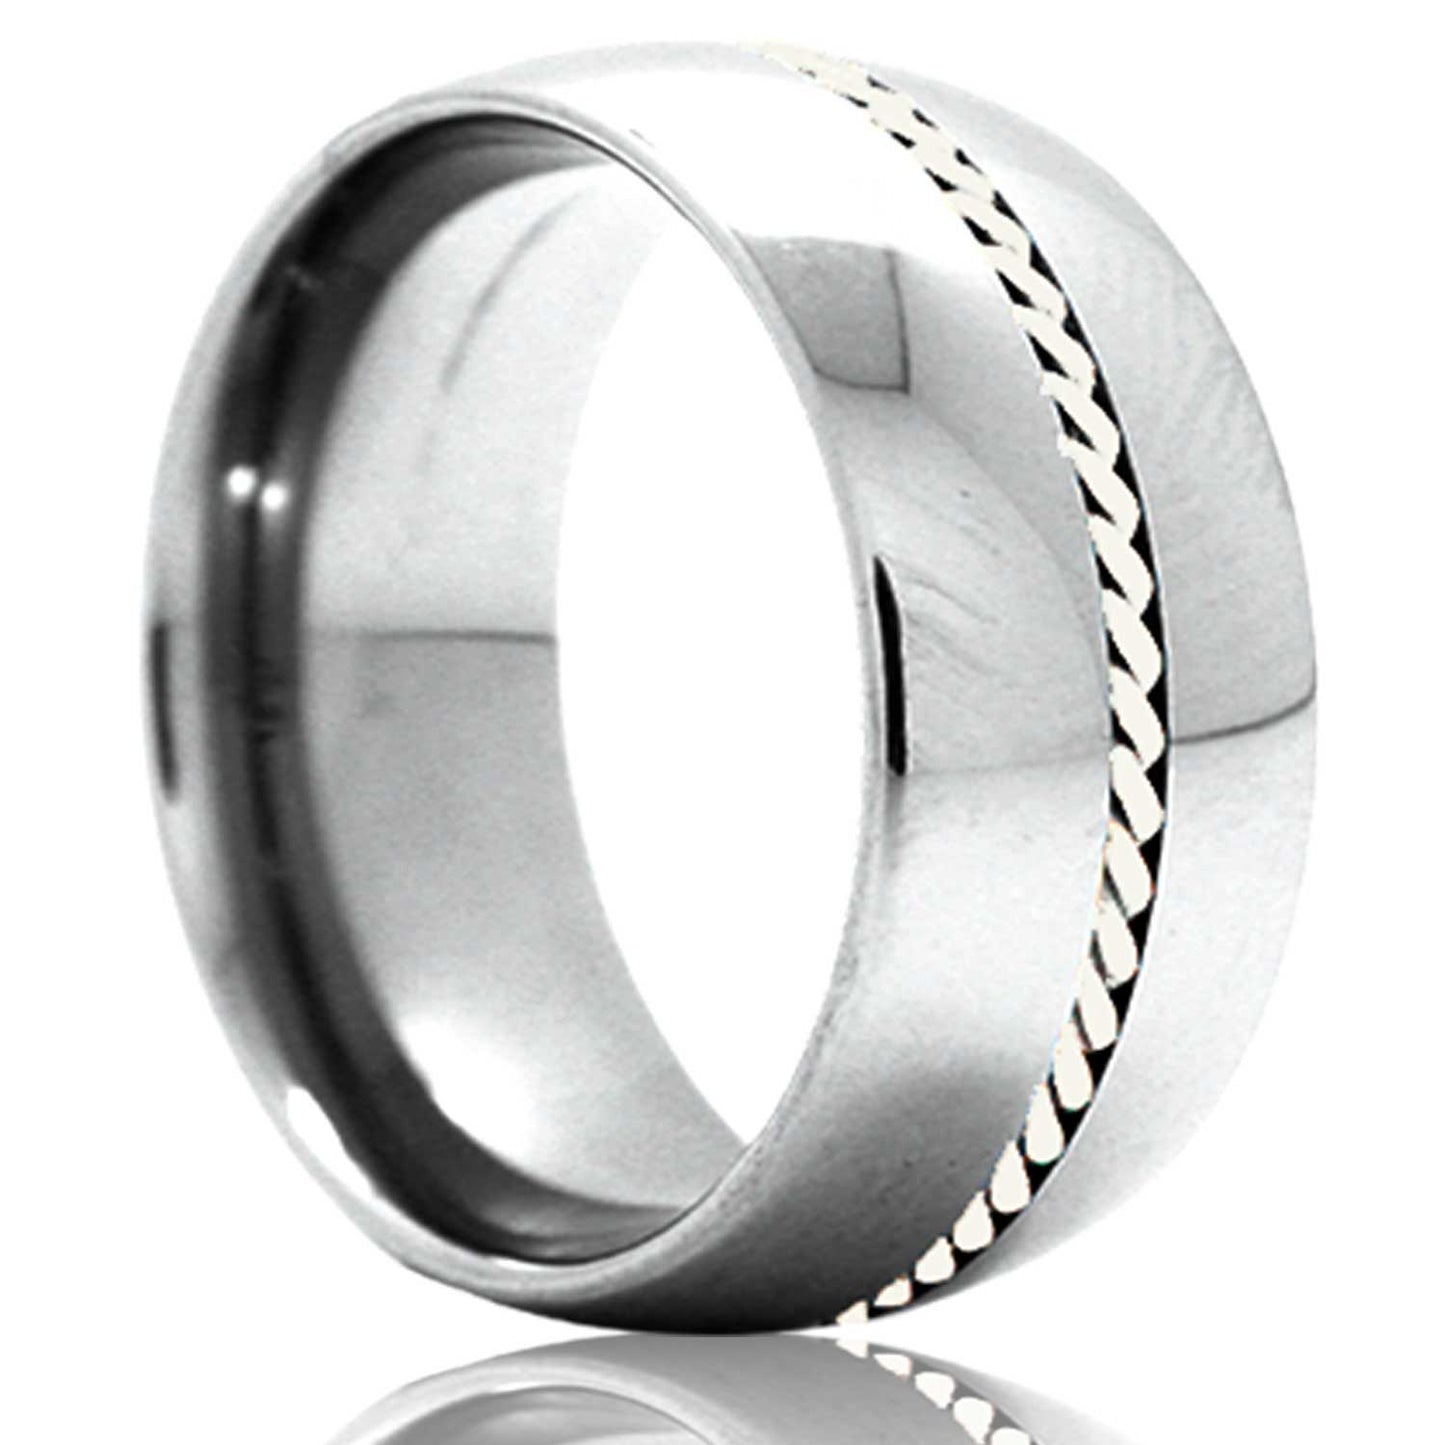 A woven argentium silver inlay domed tungsten wedding band displayed on a neutral white background.